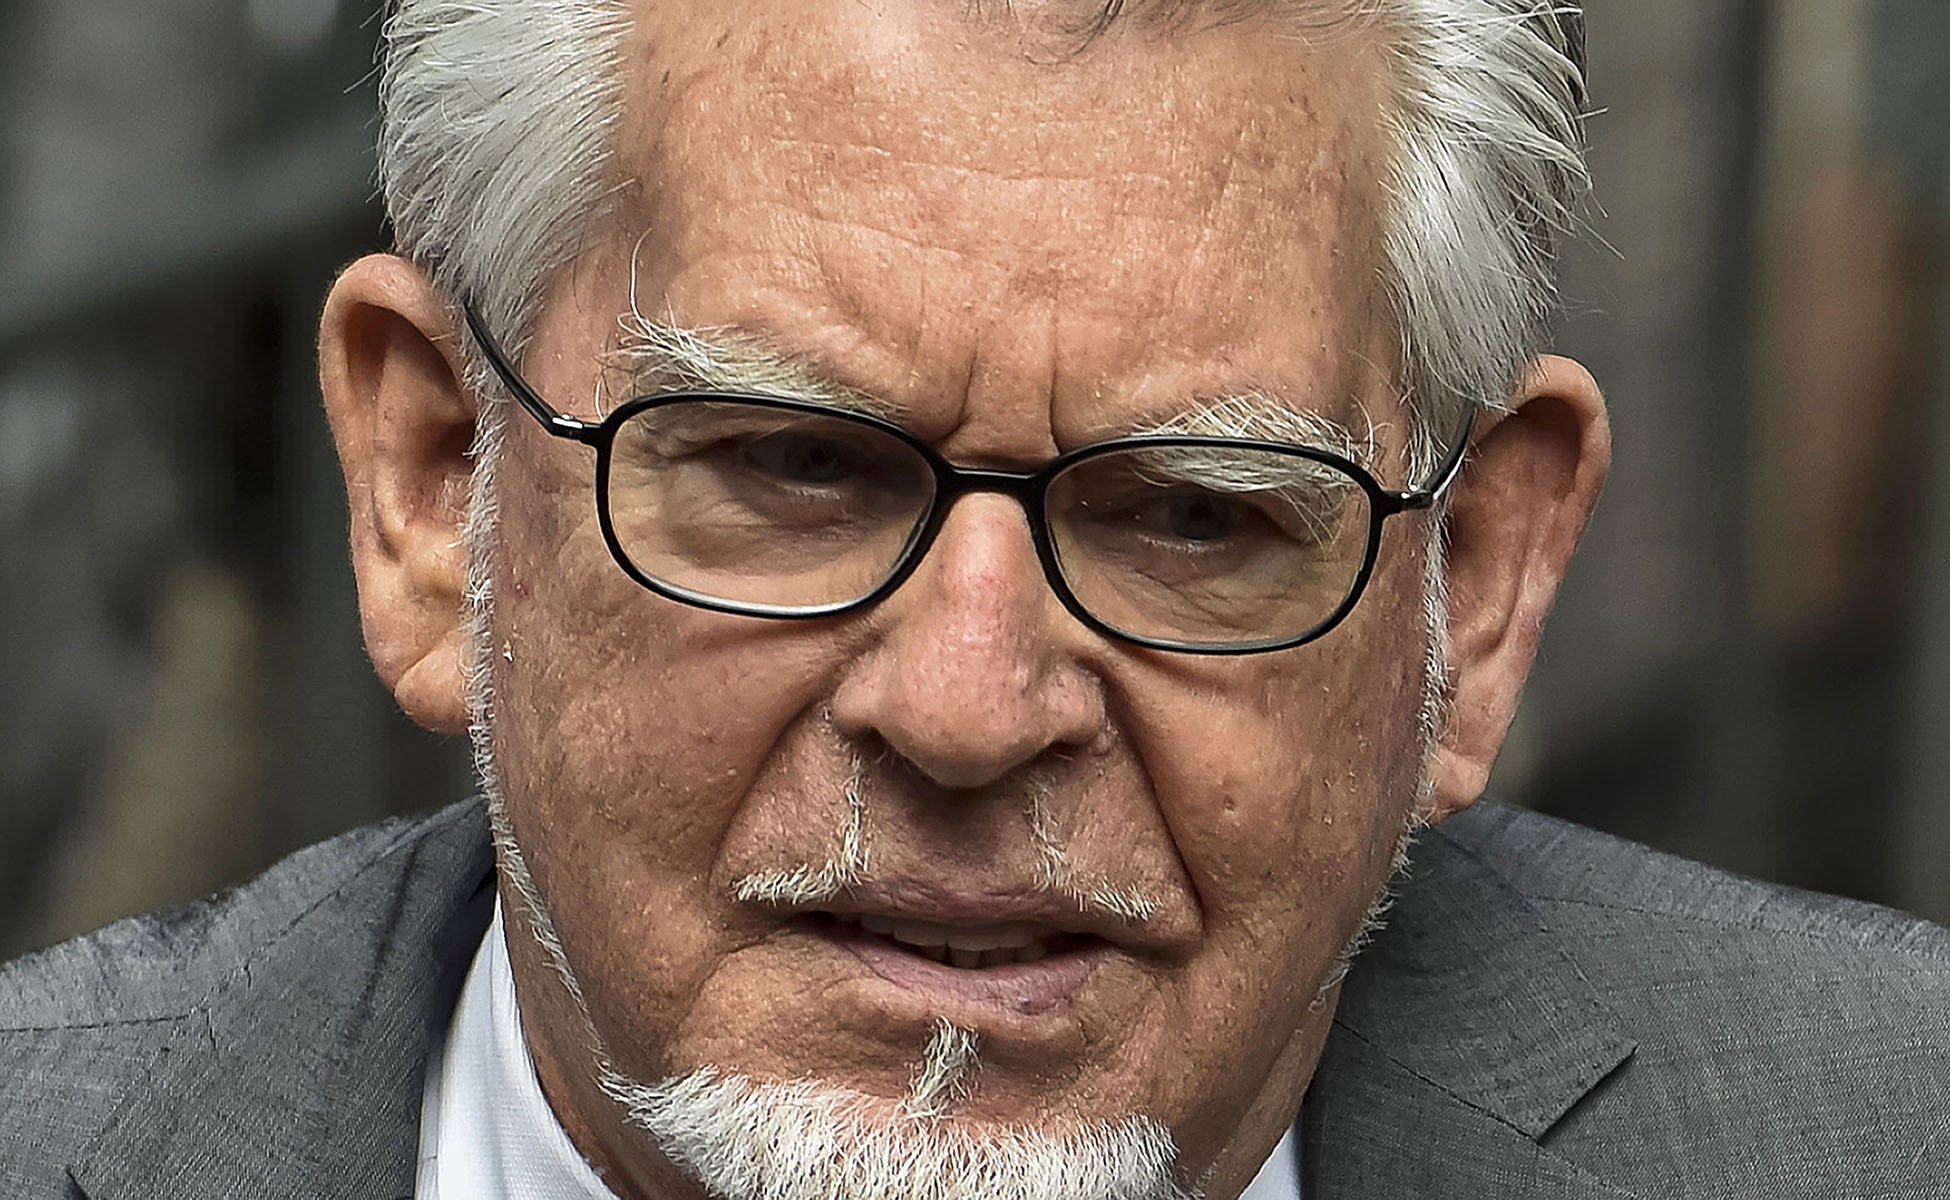 Rolf Harris writes vile new song in prison taunting vicitms